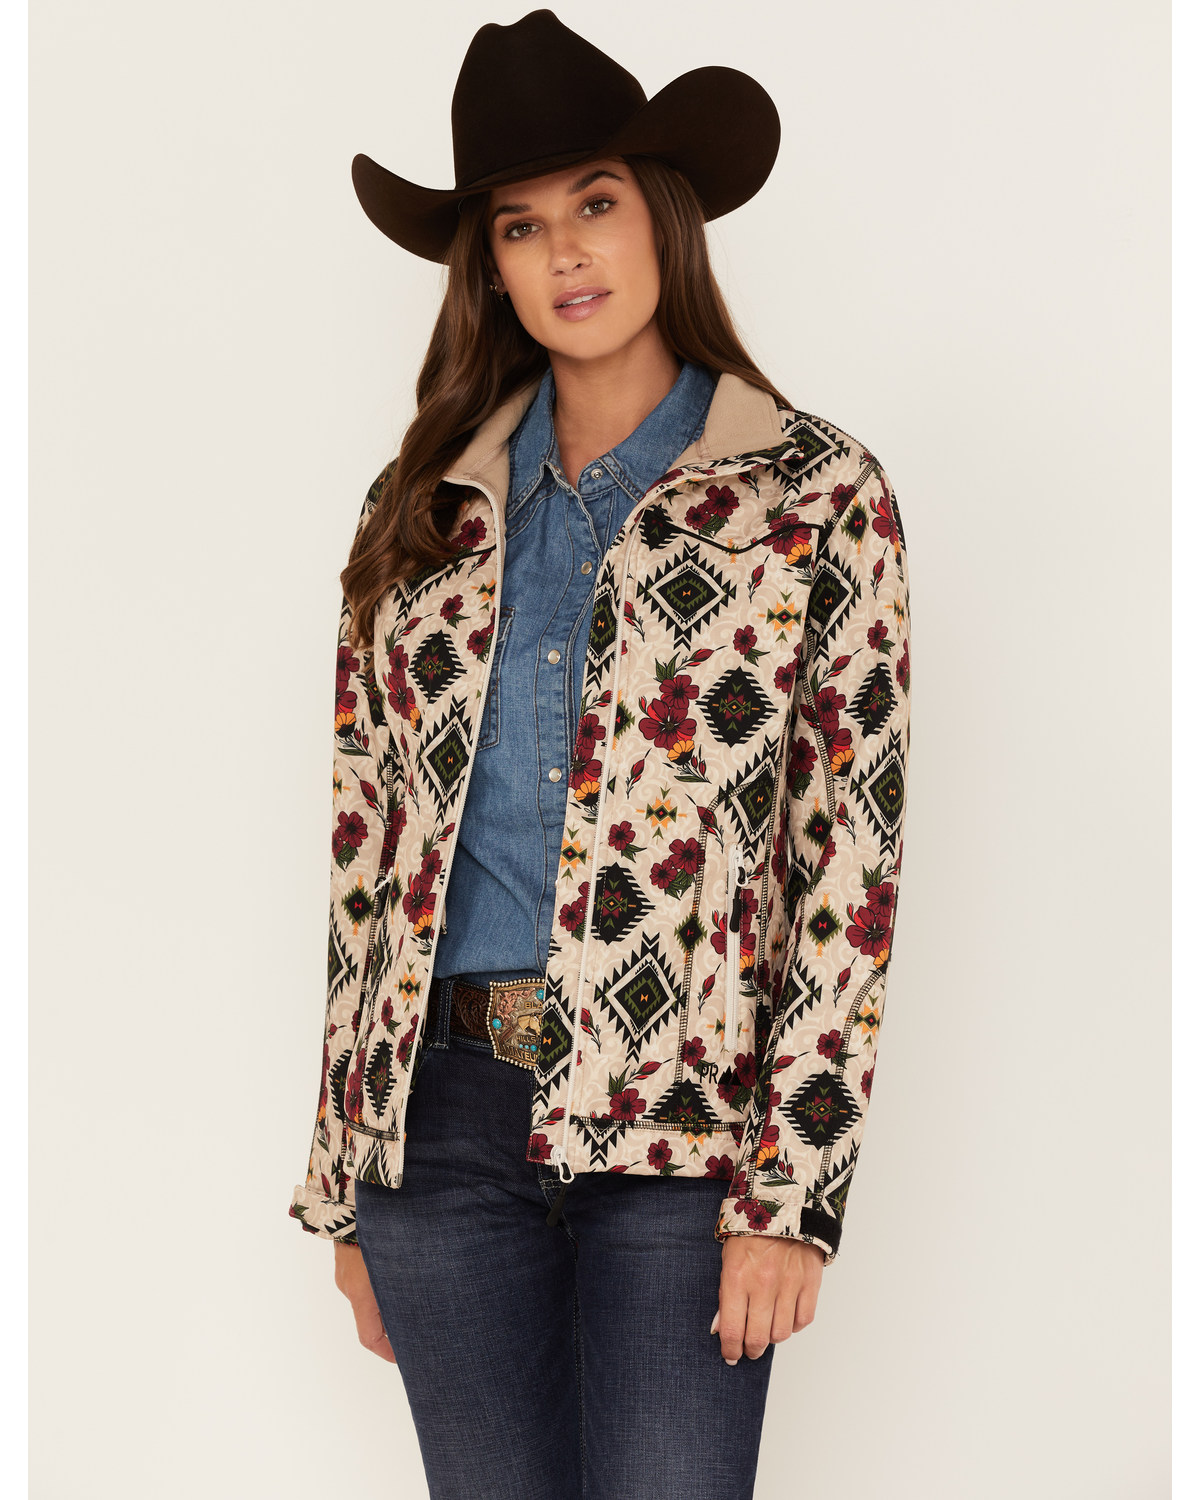 Powder River Outfitters Women's Floral Southwestern Print Softshell Jacket